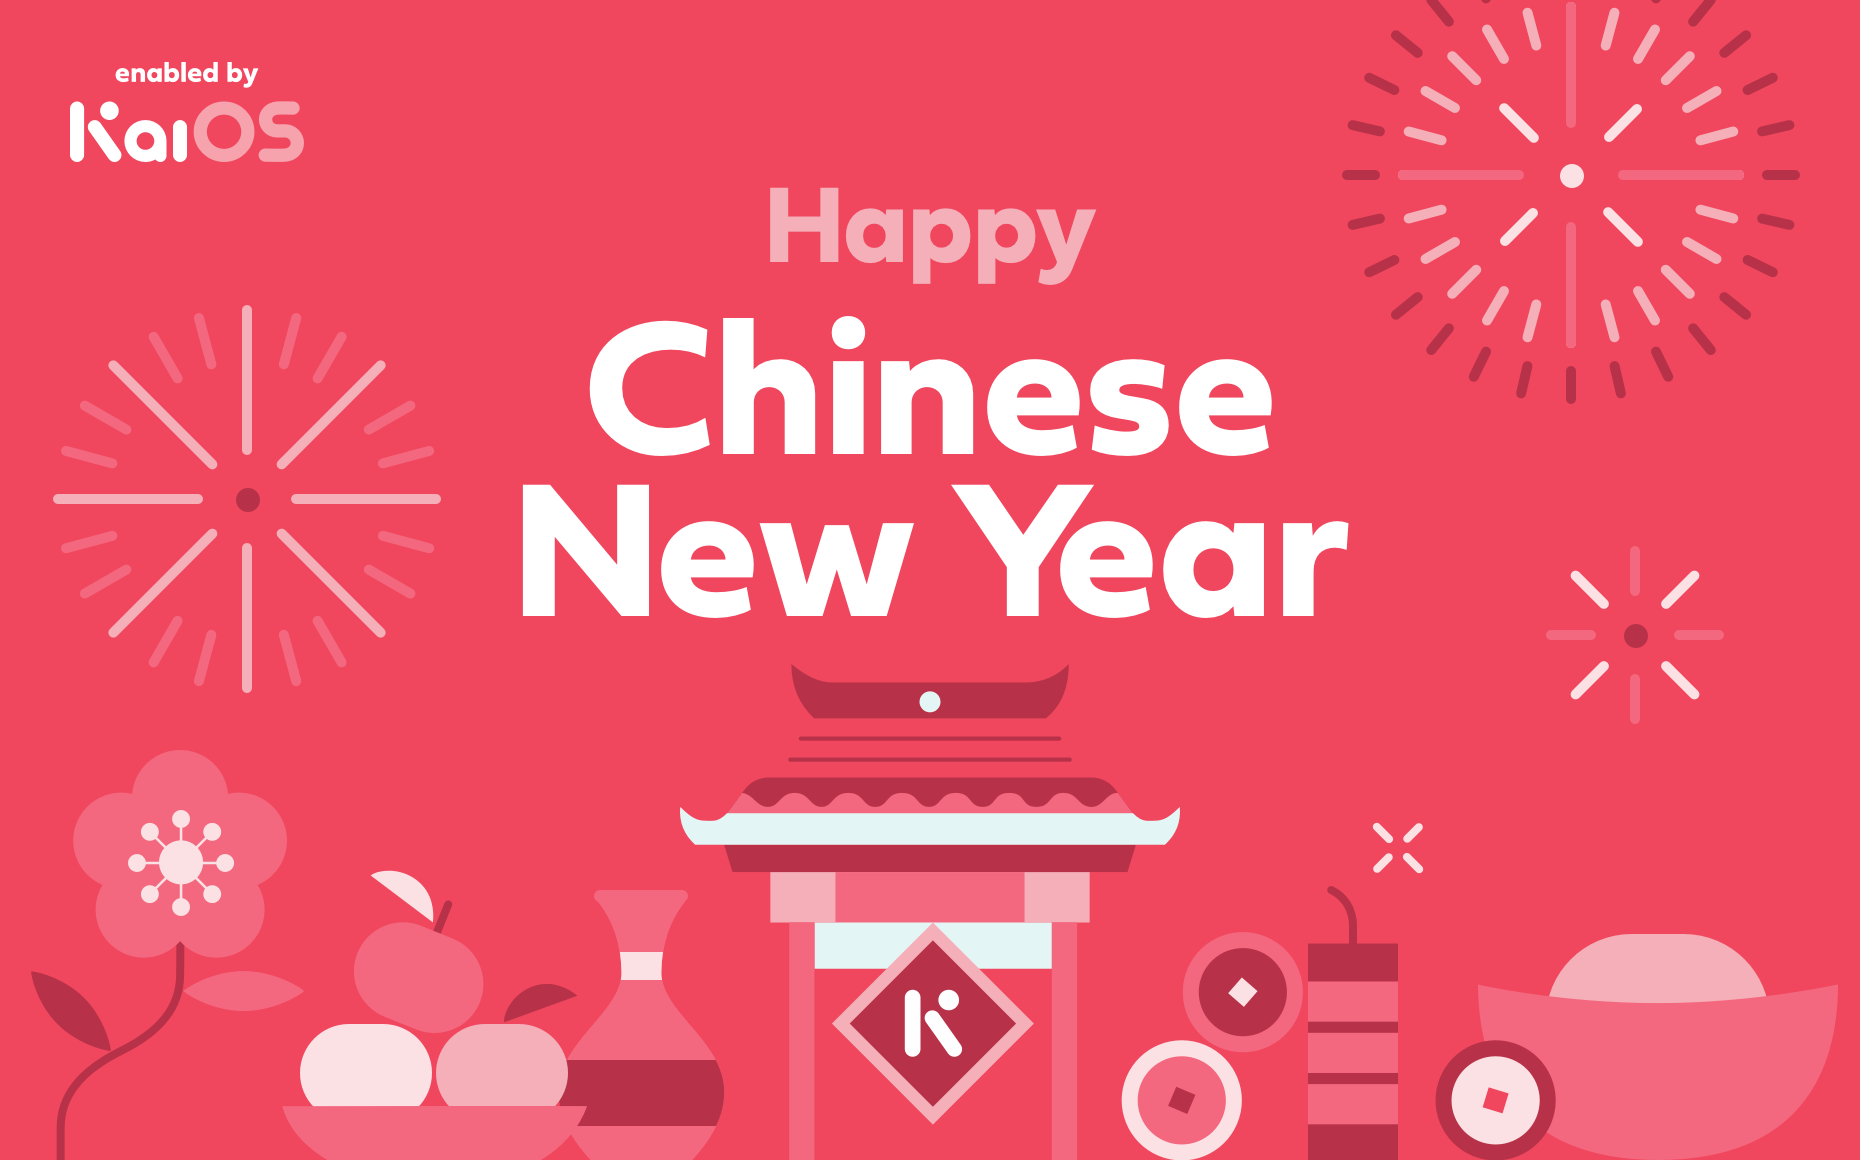 Happy Chinese New Year from KaiOS! 